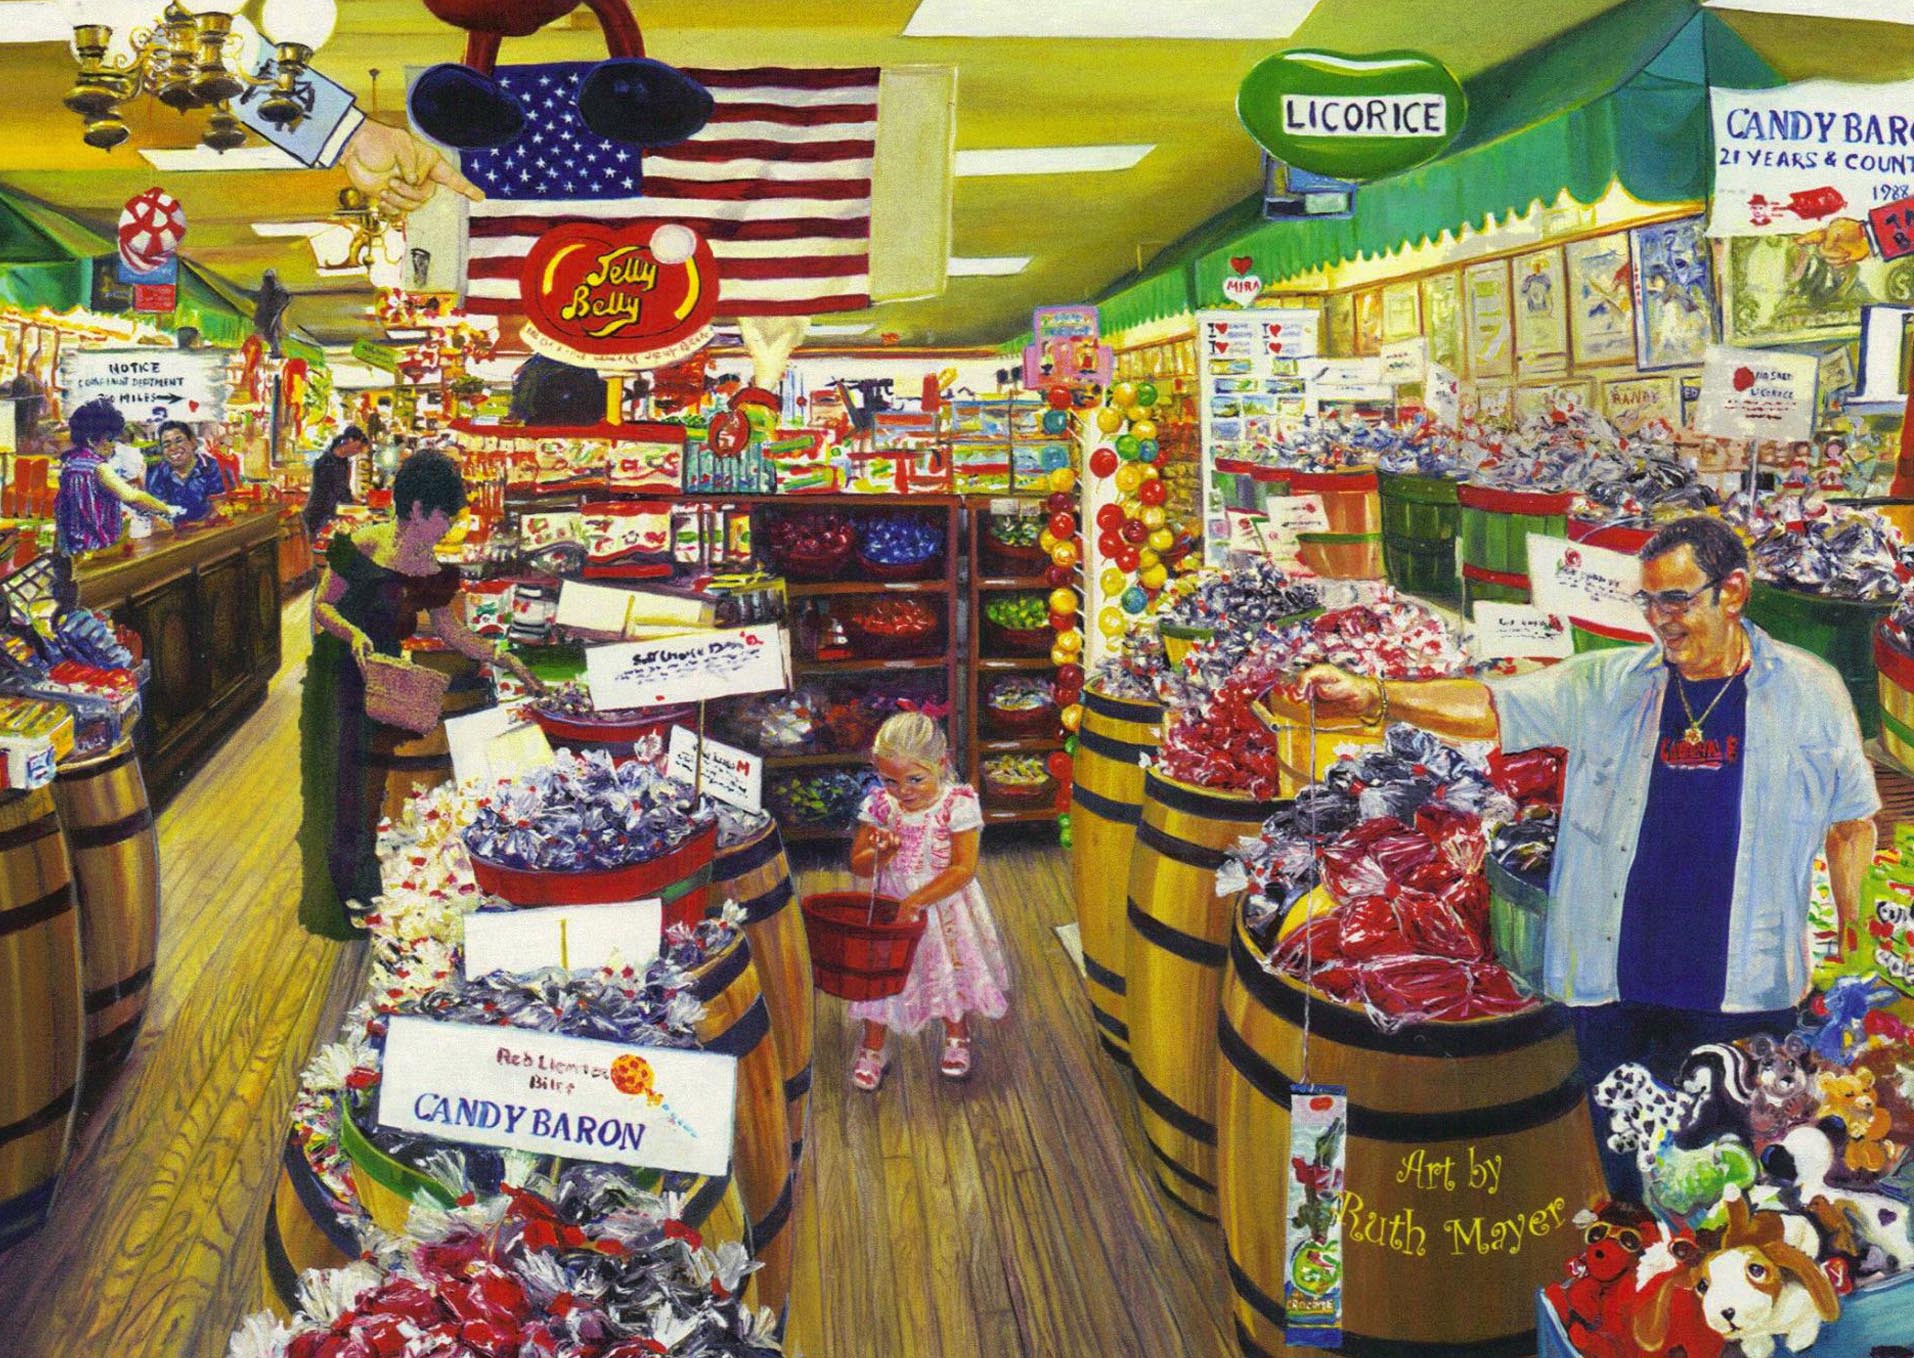 Illustration of The Candy Baron store